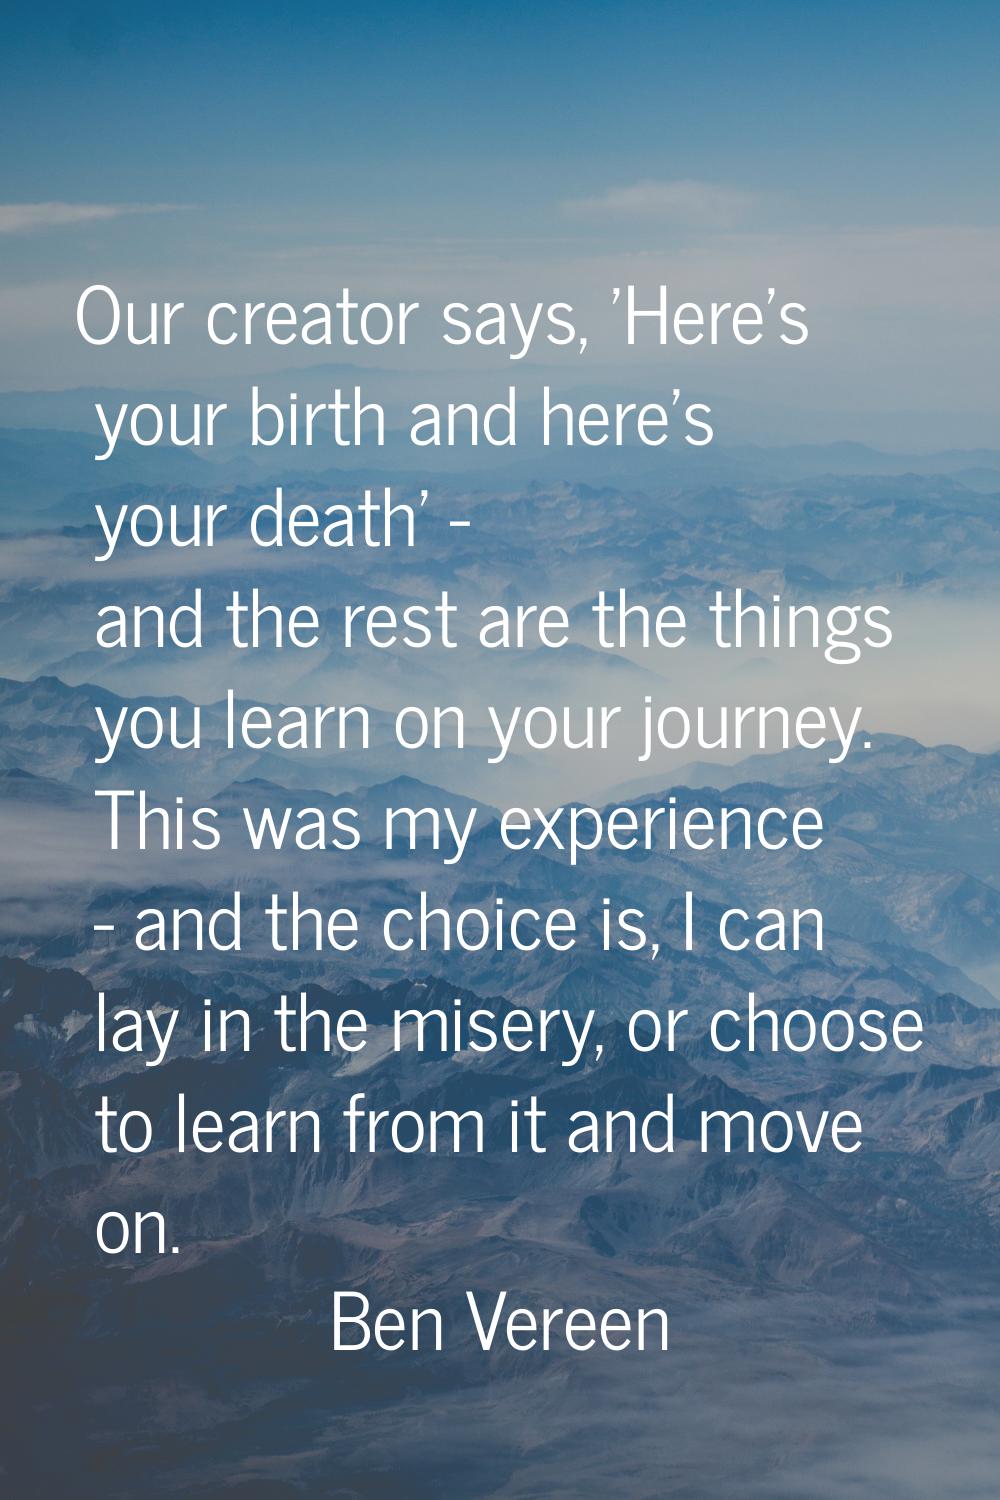 Our creator says, 'Here's your birth and here's your death' - and the rest are the things you learn